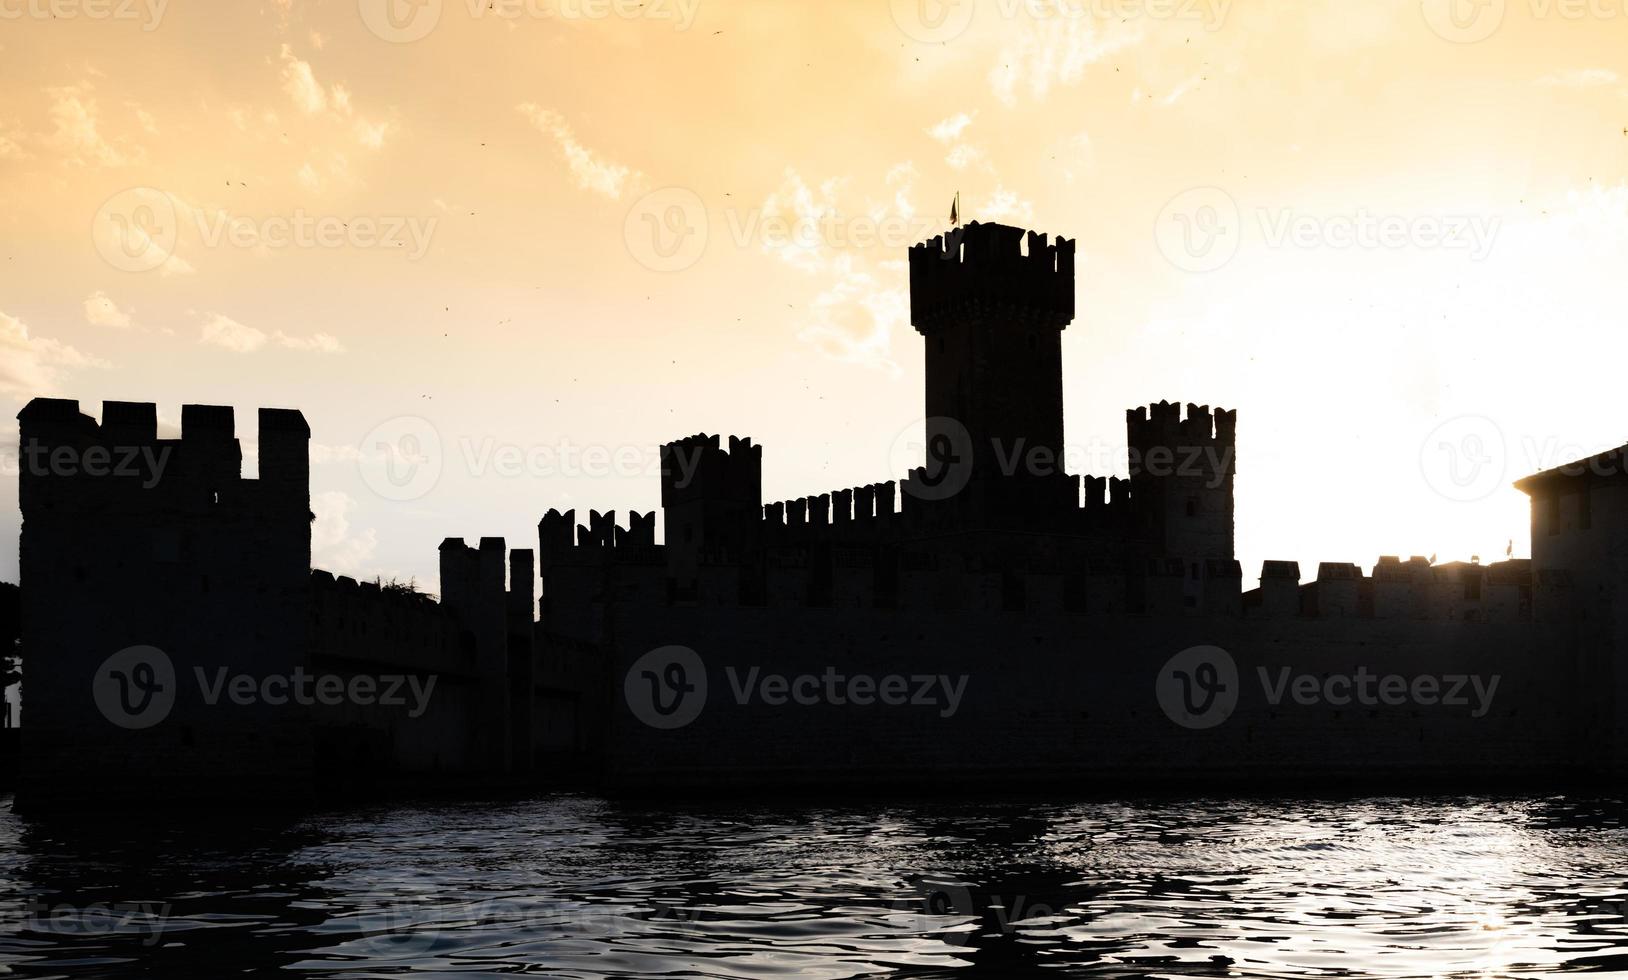 Italy - Sirmone castle silhouette on the Garda lake at sunset. Medieval architecture with tower. photo